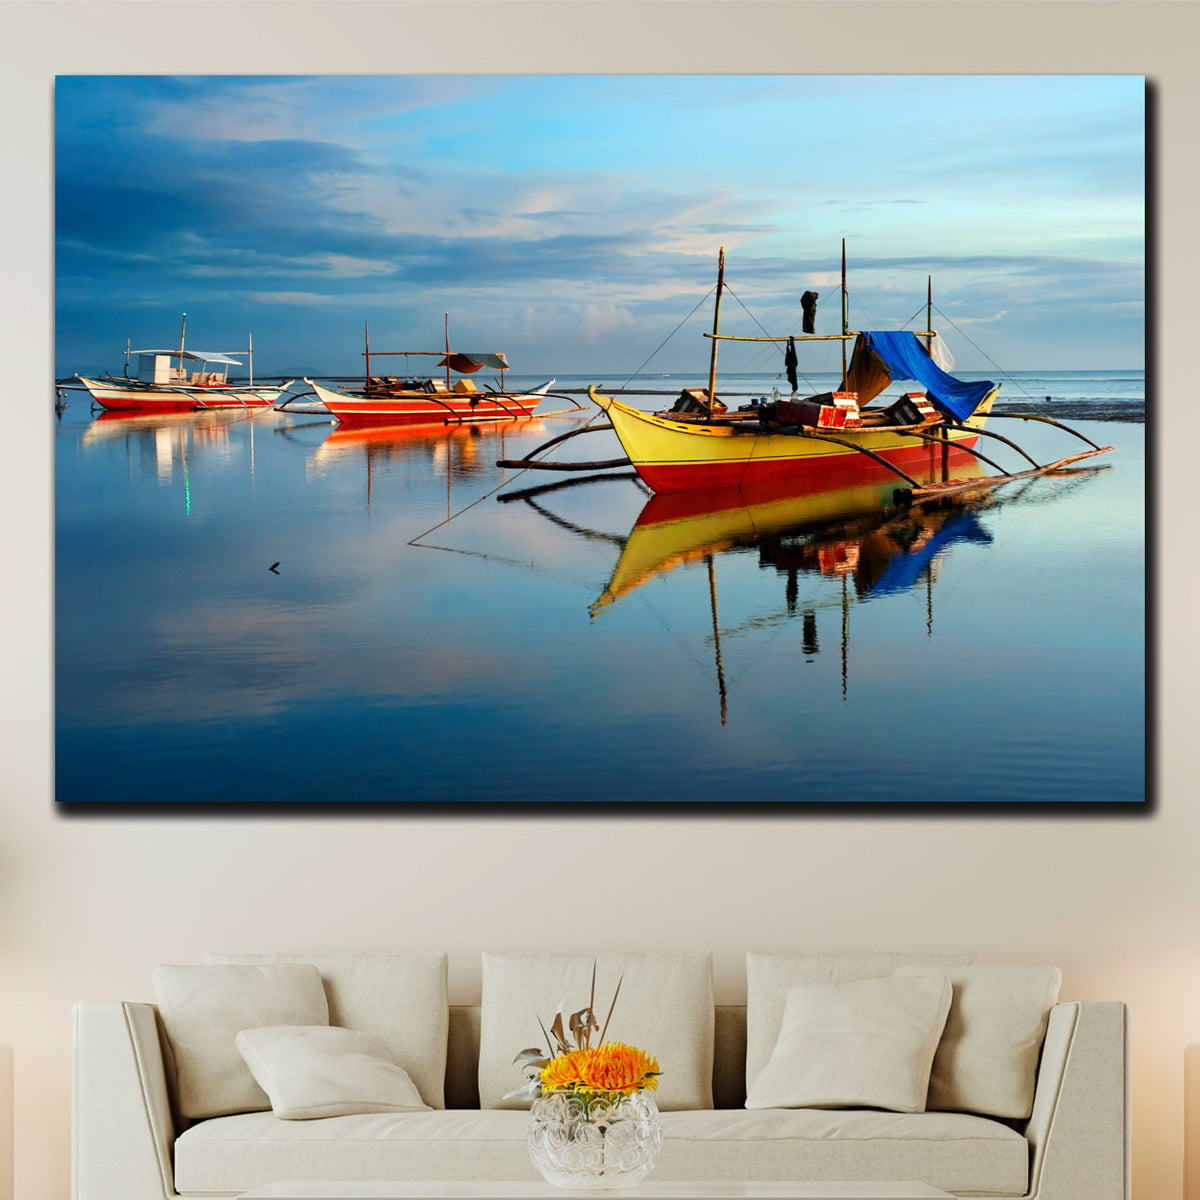 https://cdn.shopify.com/s/files/1/0387/9986/8044/products/BoatsintheWaterCanvasArtprintStretched-3.jpg